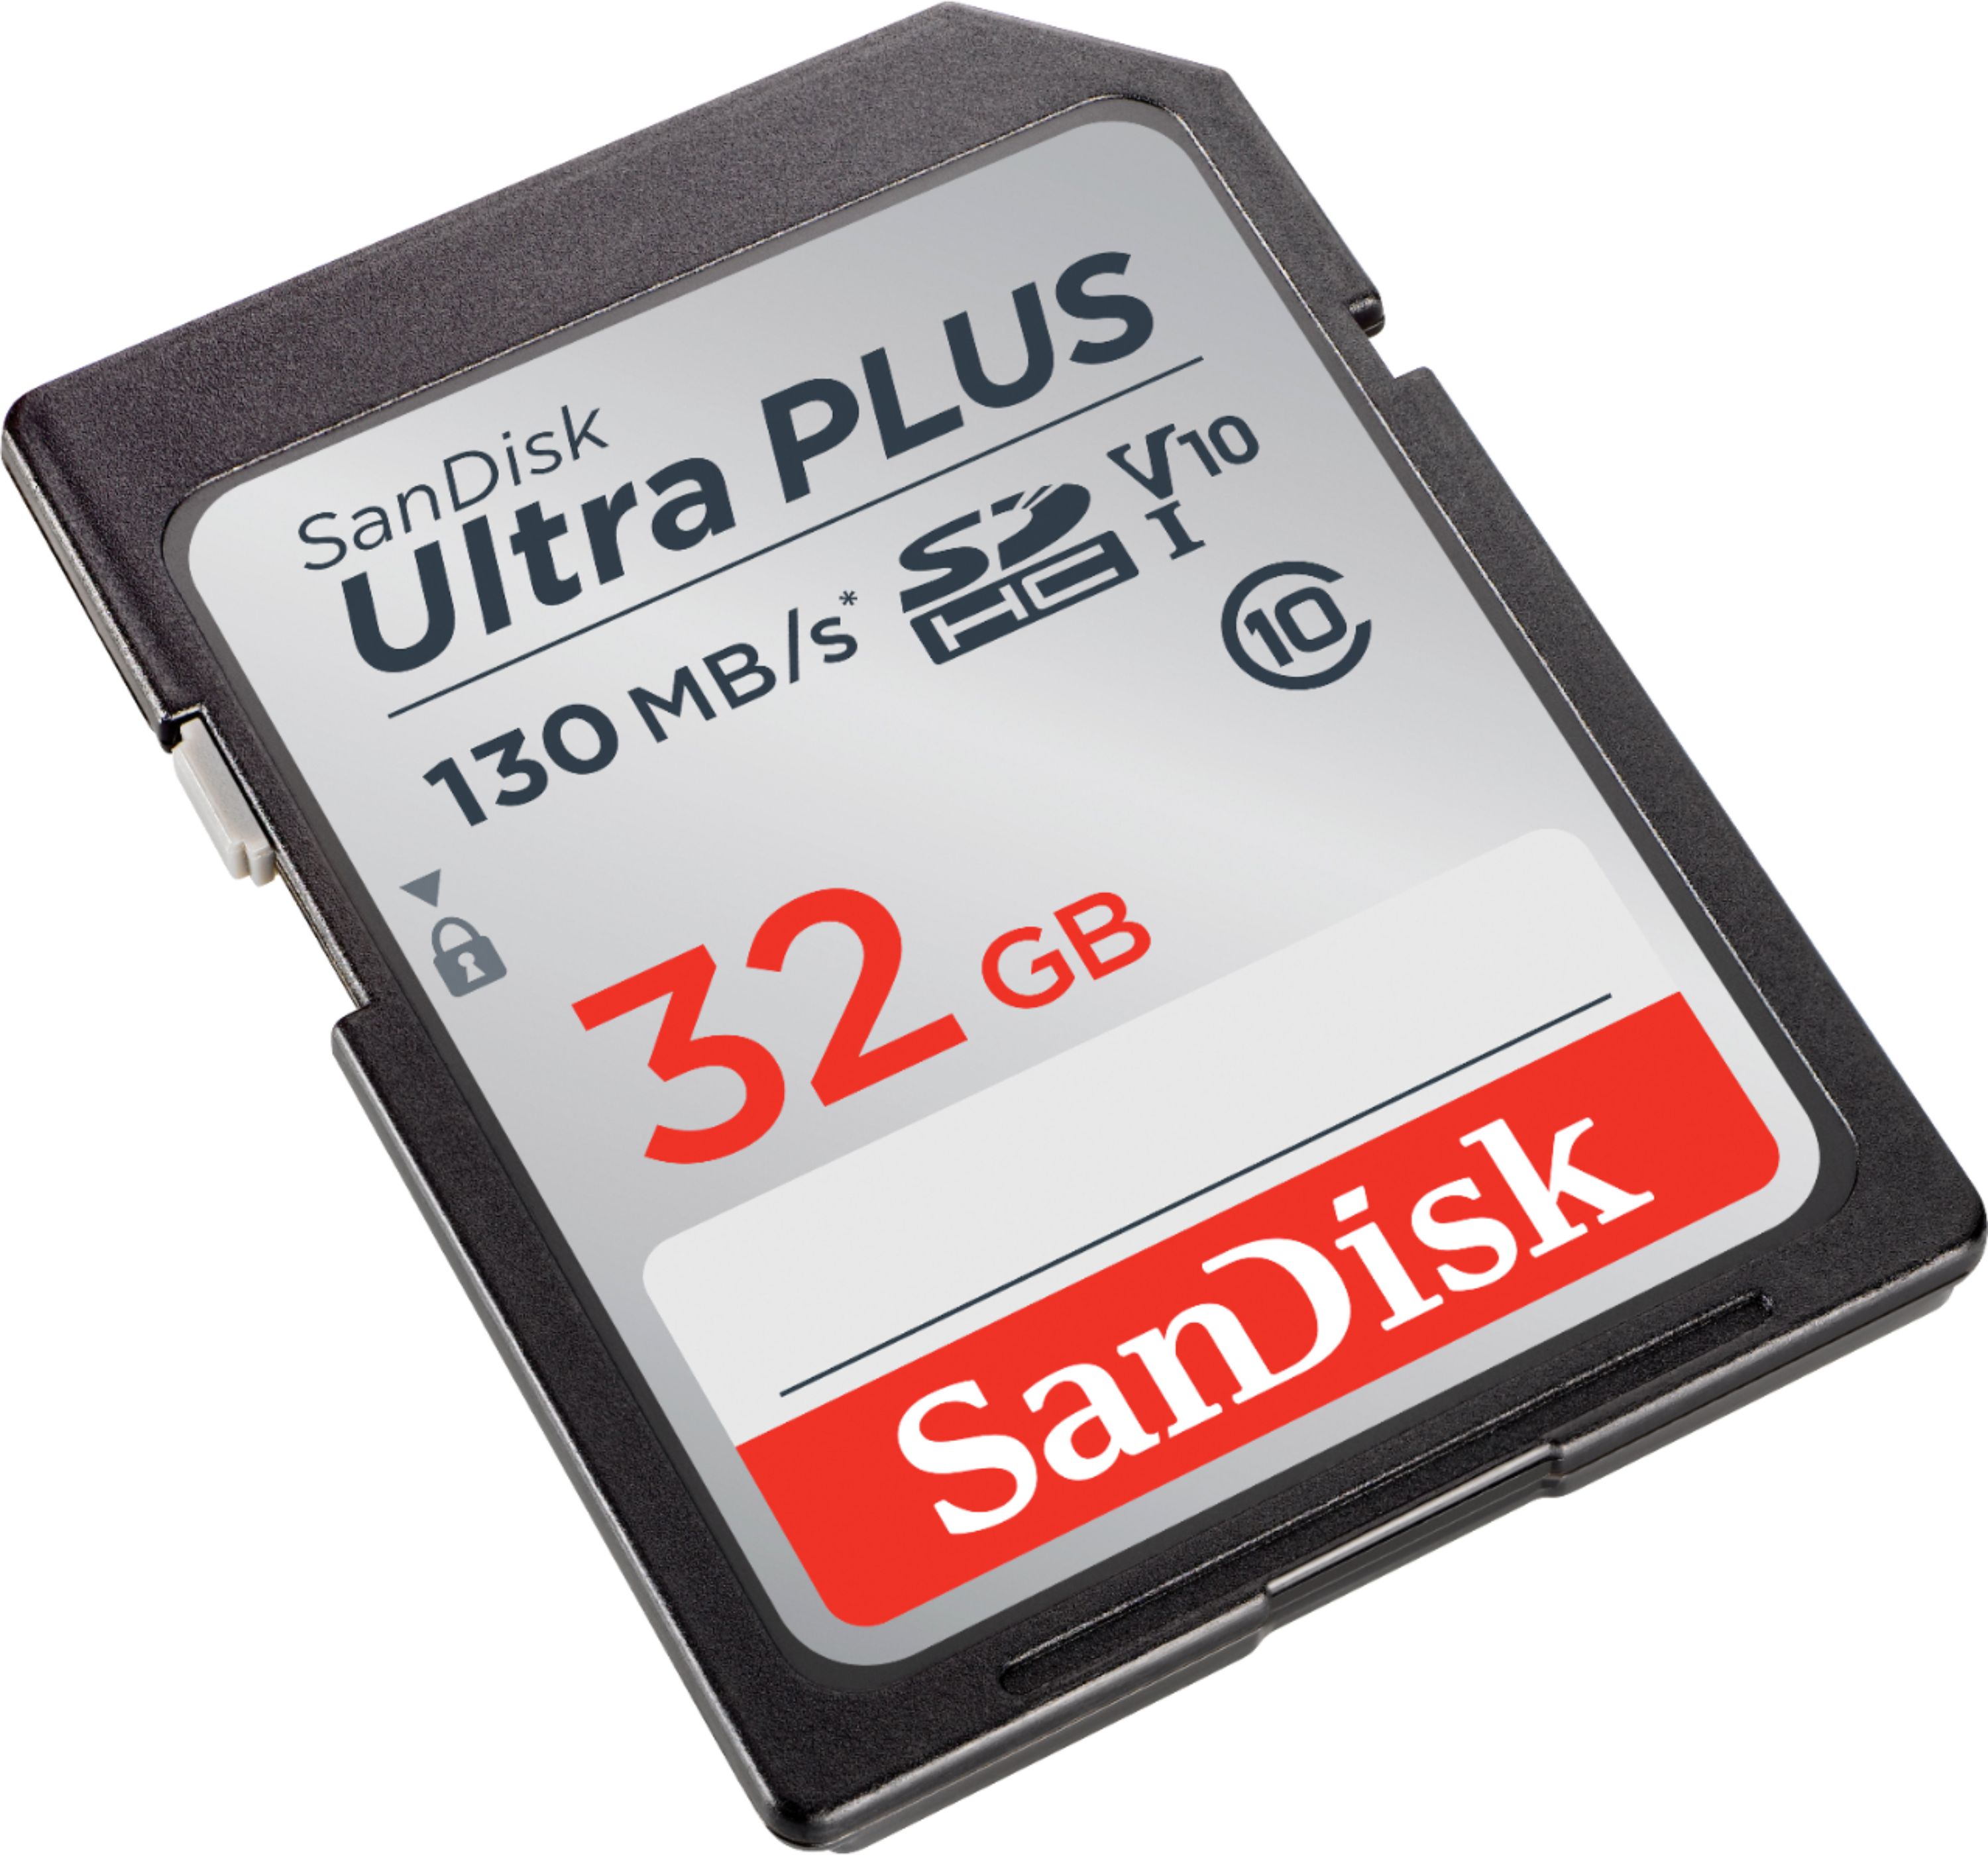 rich vegetarian Low SanDisk Ultra Plus 32GB SDHC UHS-I Memory Card SDSDUW3-032G-AN6IN - Best Buy